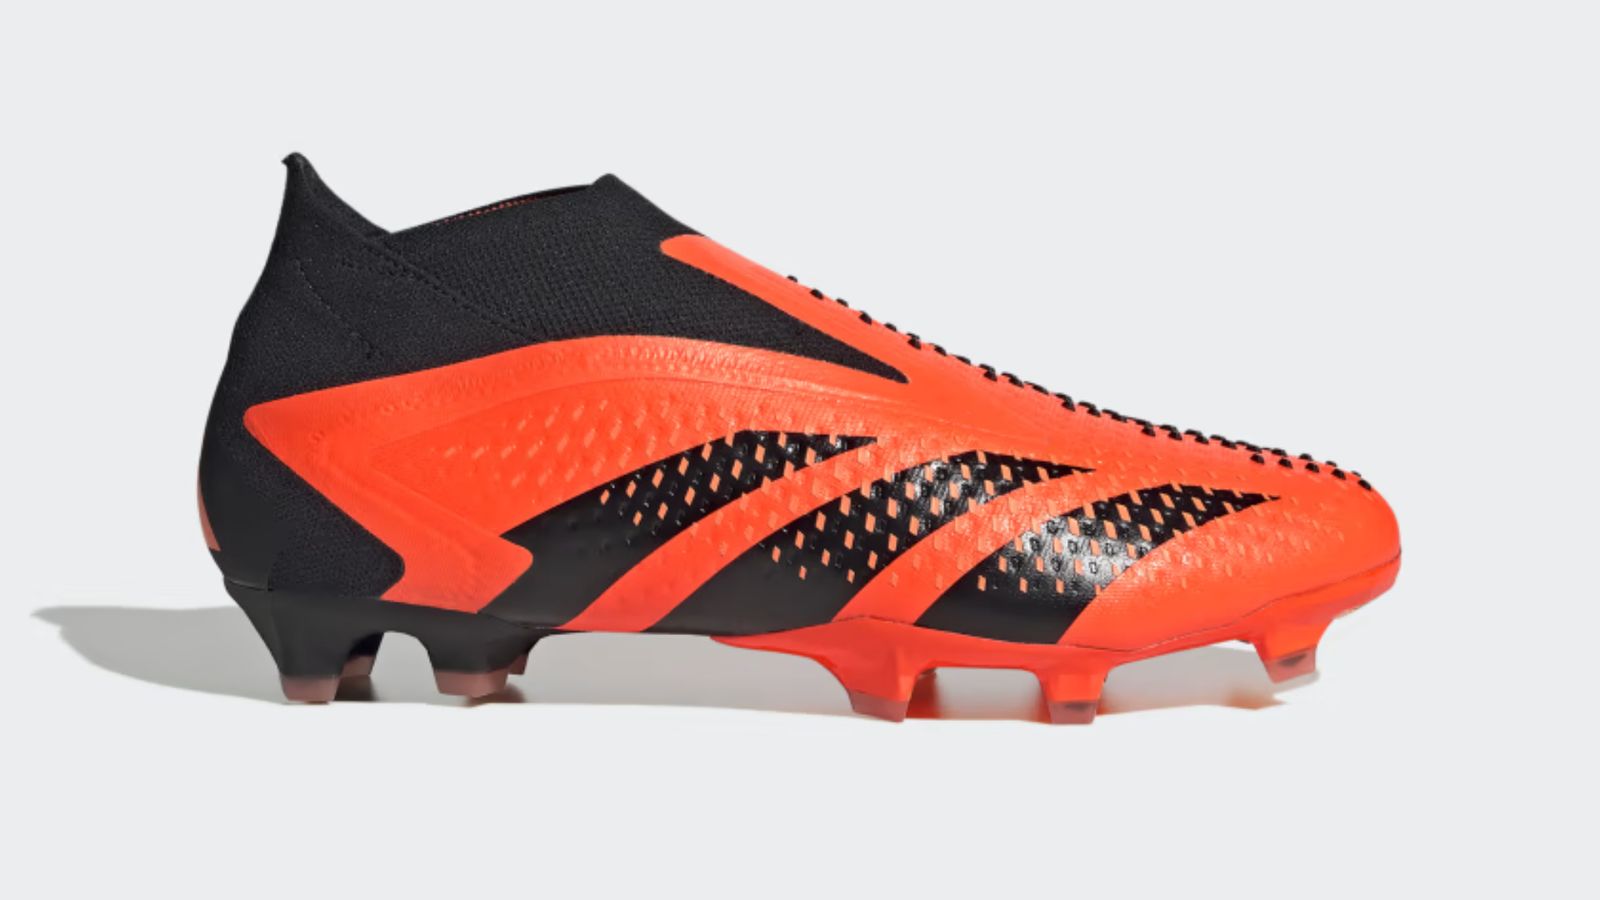 adidas Predator Accuracy+ product image of an orange and black laceless football boot, with added "studs" across the upper.